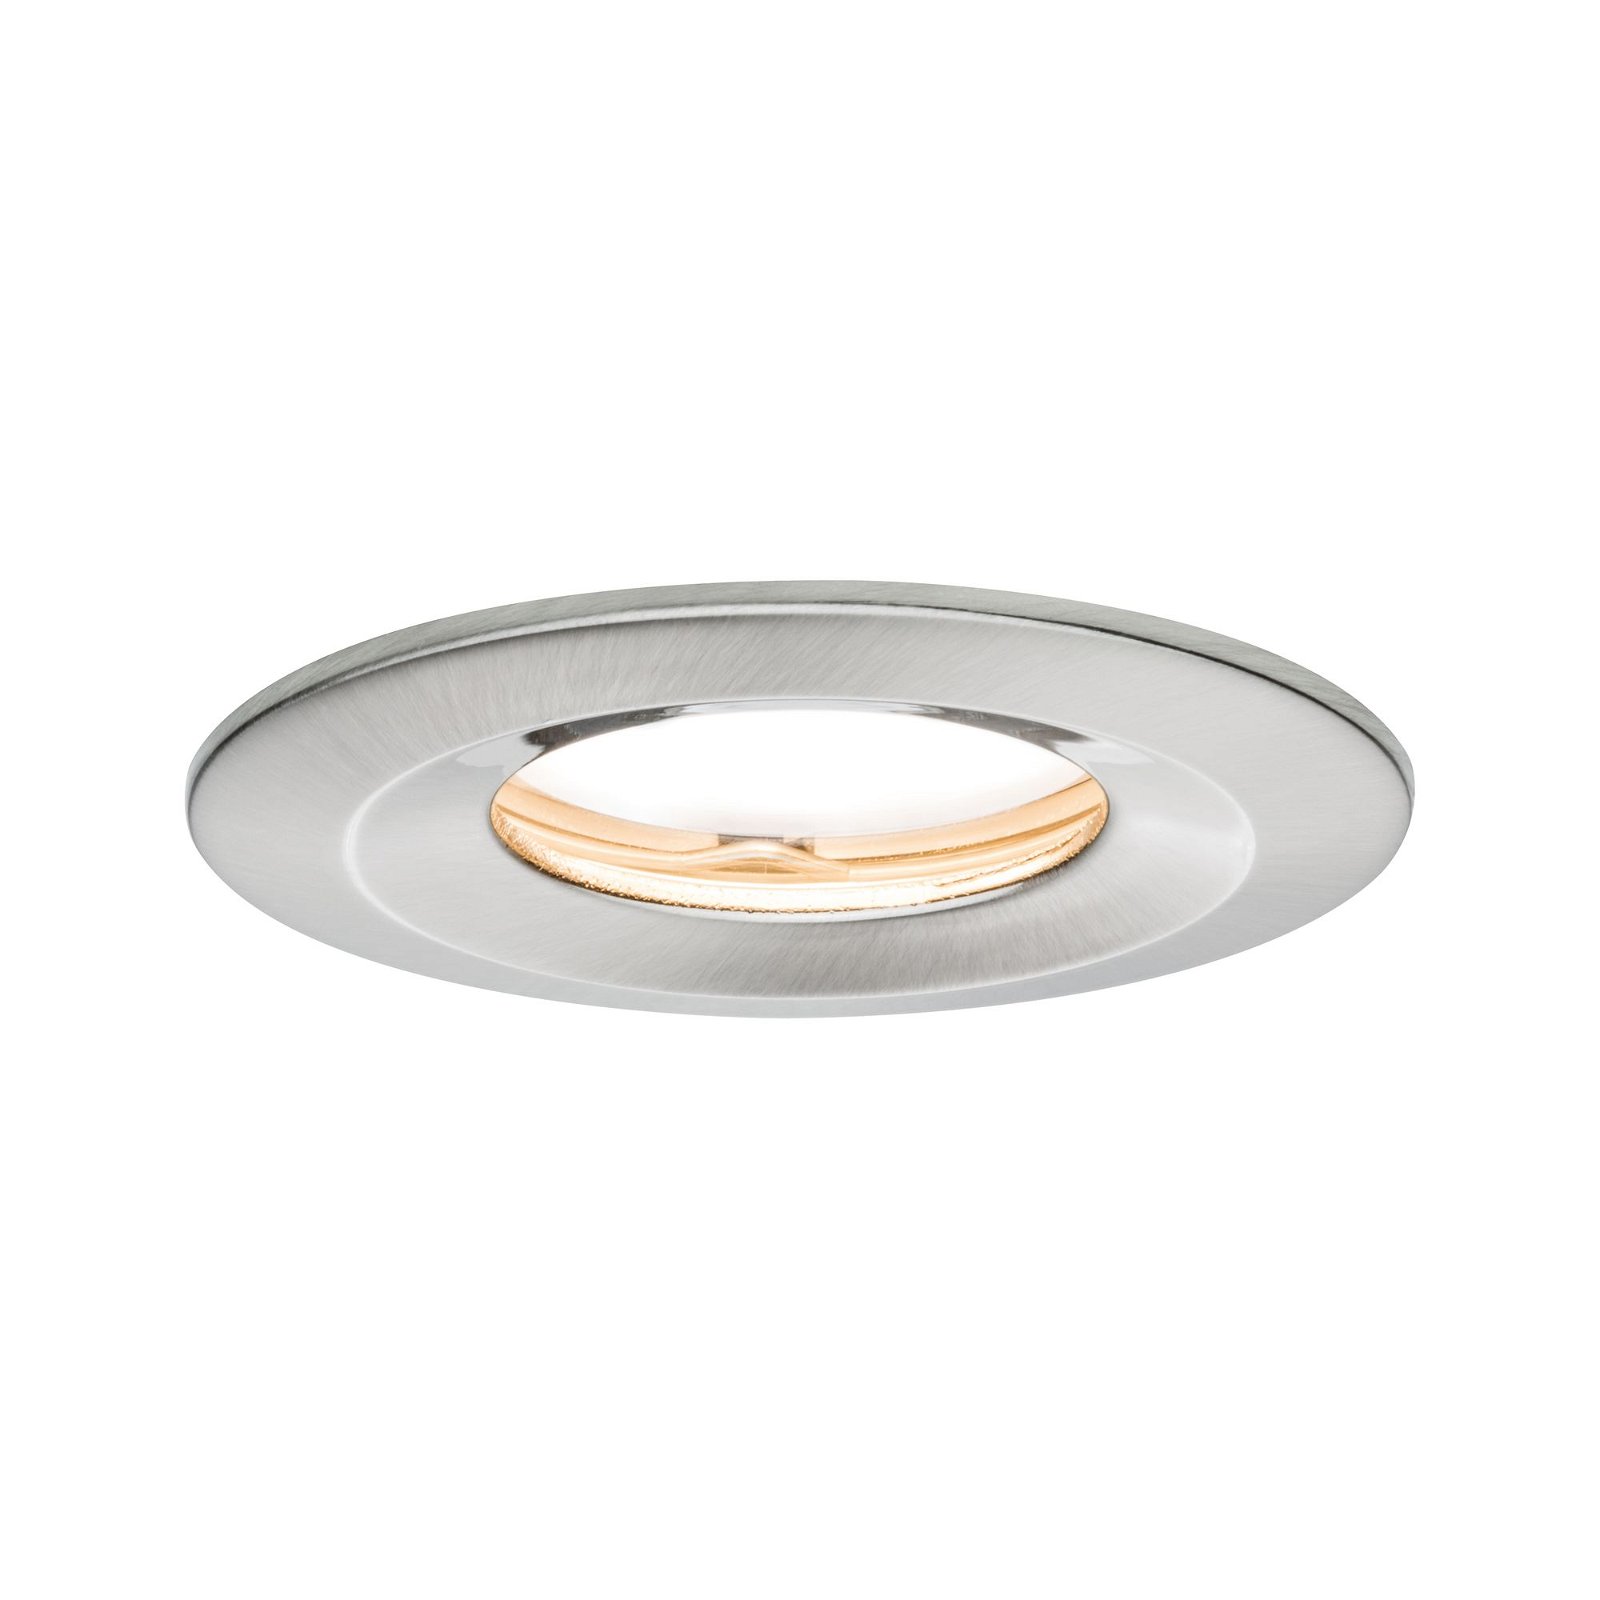 LED Recessed luminaire Nova Plus Coin Rigid IP65 round 78mm Coin 6W 470lm 230V dimmable 2700K Brushed iron